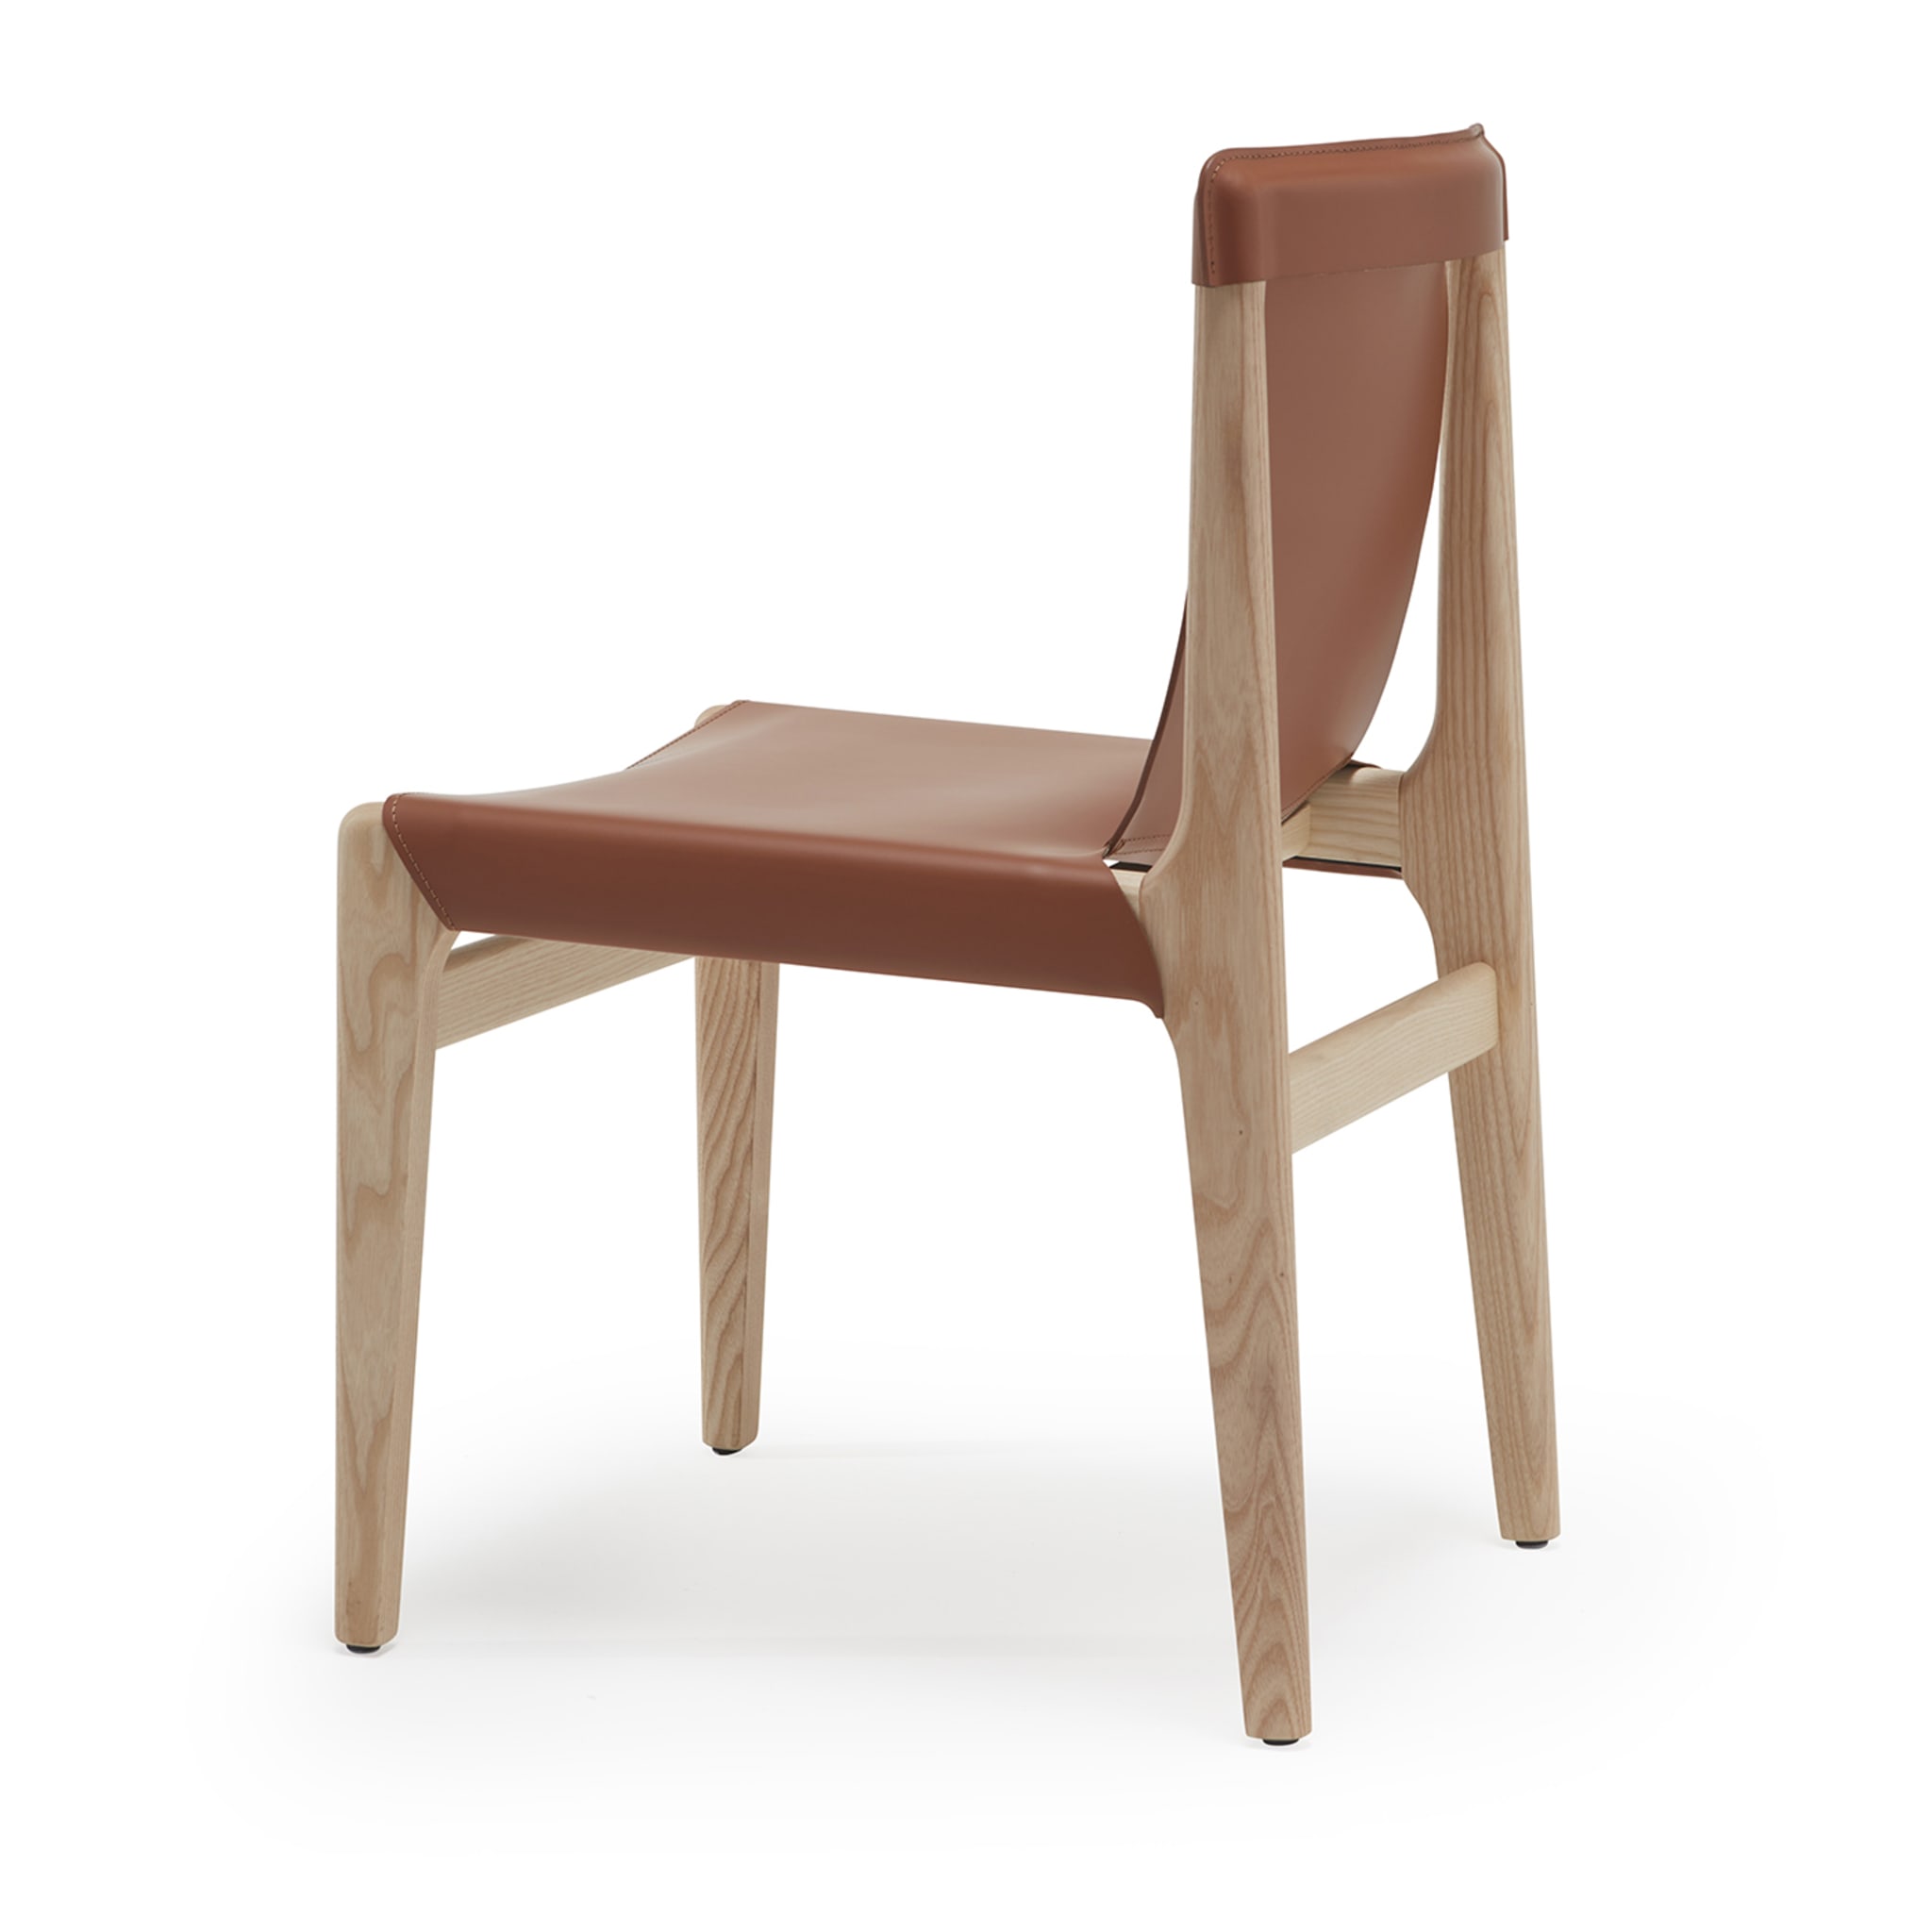 Burano Leather Chair by Balutto Associati - Alternative view 1